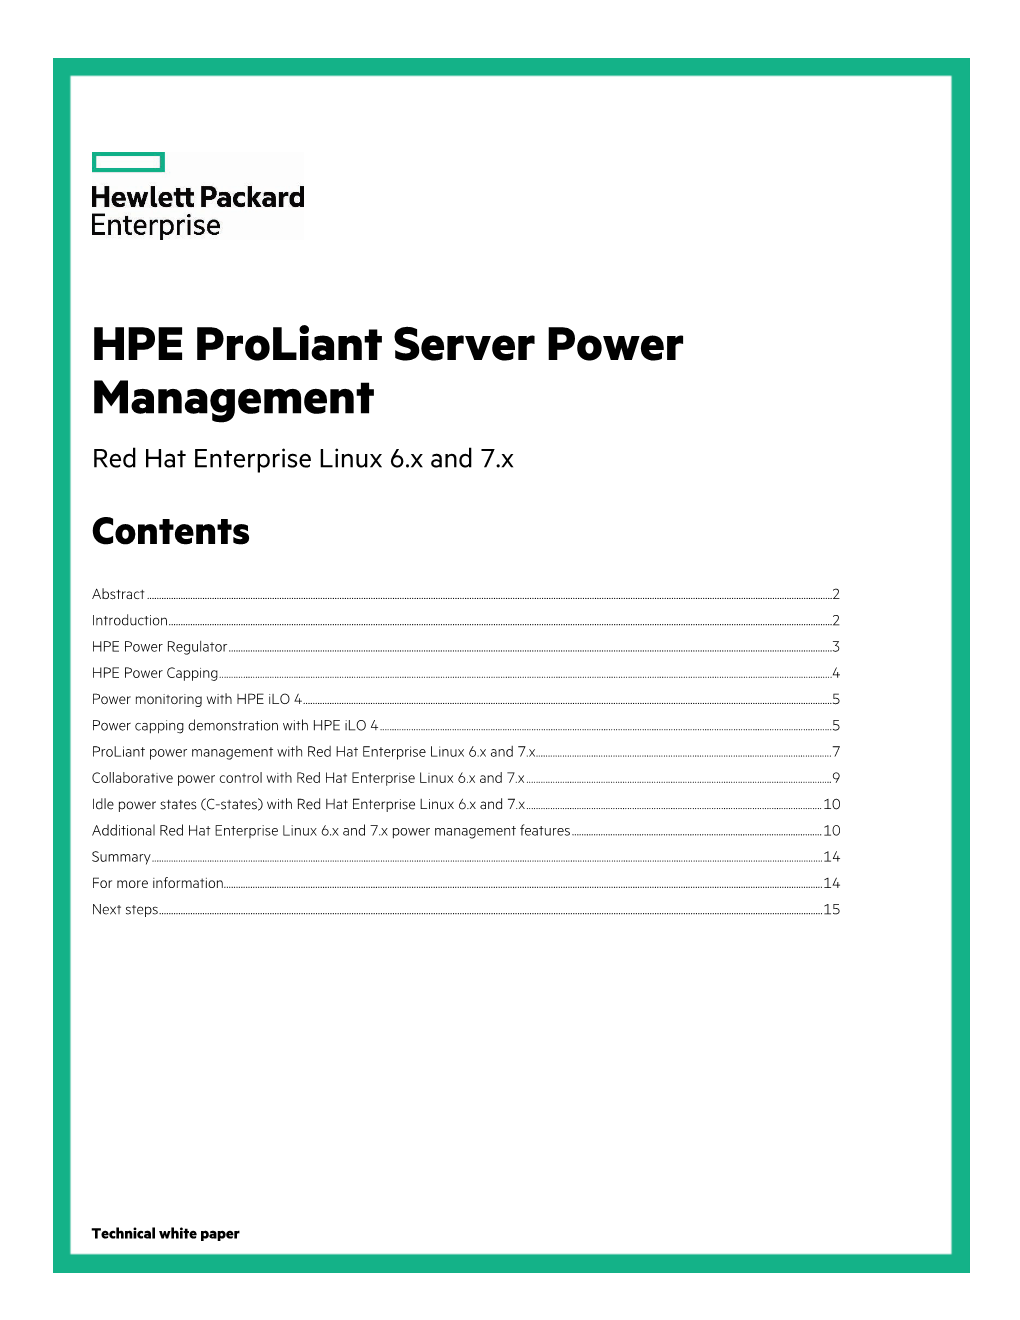 HPE Proliant Server Power Management for Red Hat Enterprise Linux 6.X and 7.X Technical White Paper